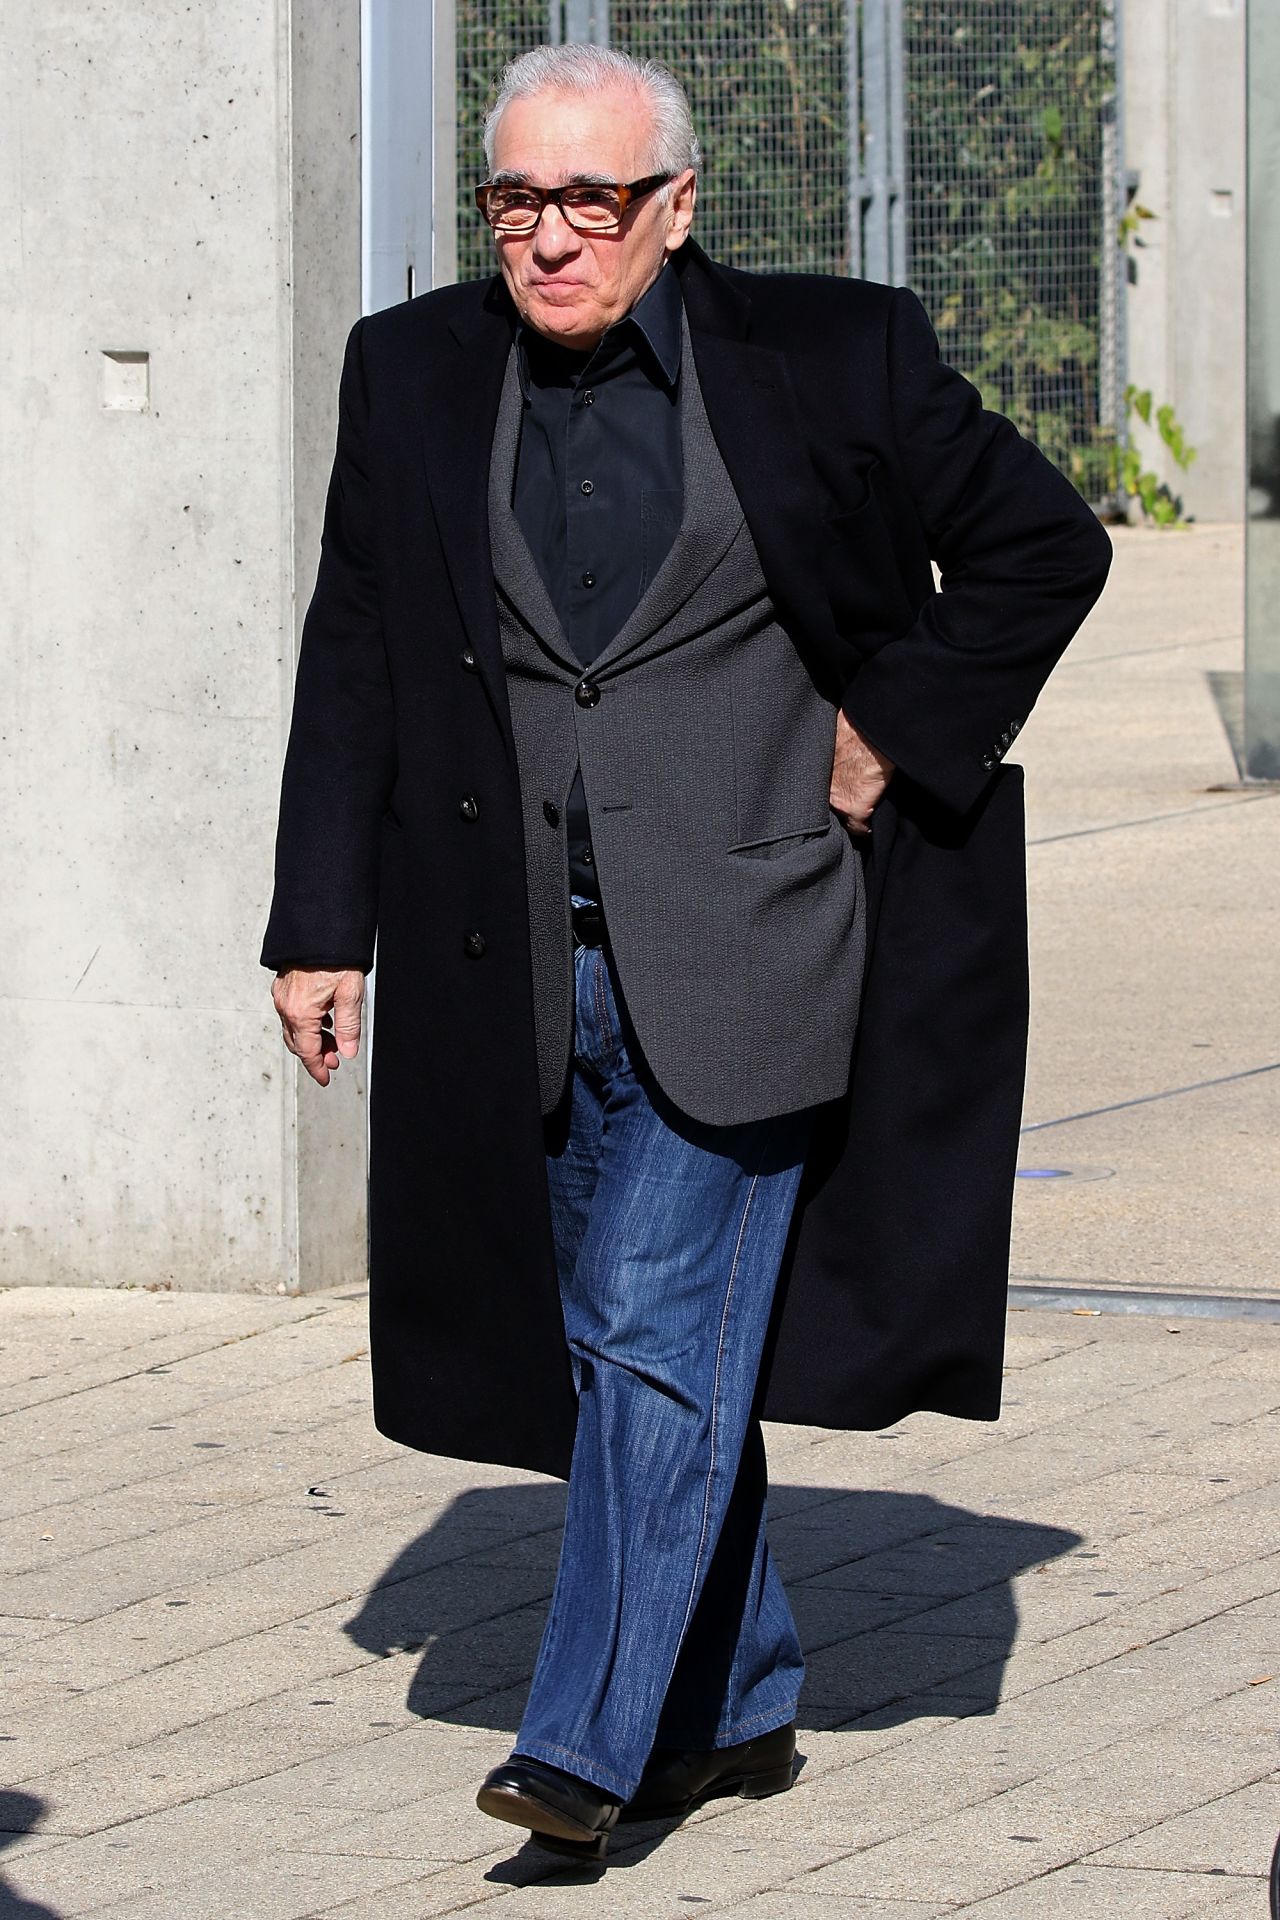 Martin Scorcese wearing a suit jacket and jeans in Lyon, France, in 2015